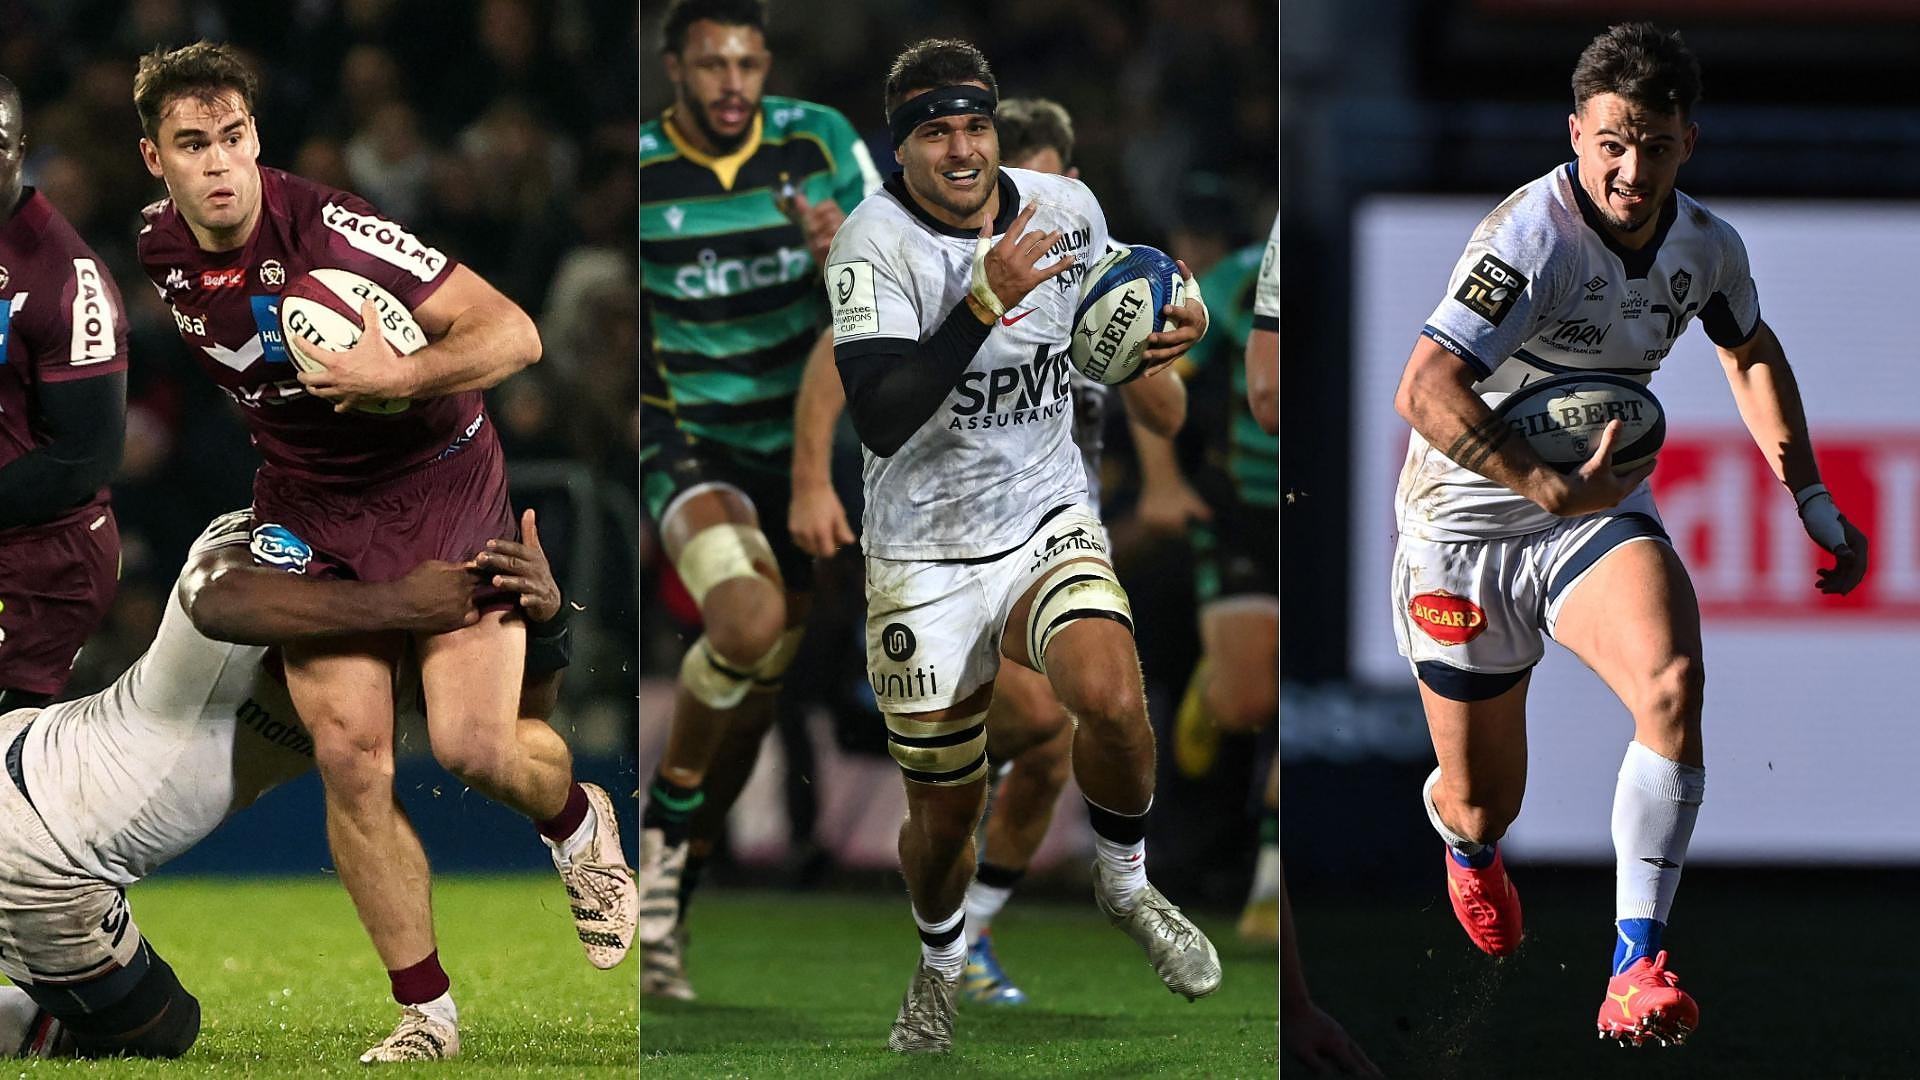 Top 14: Penaud, Abadie, Popelin…, the results of the 10 best recruits at mid-season